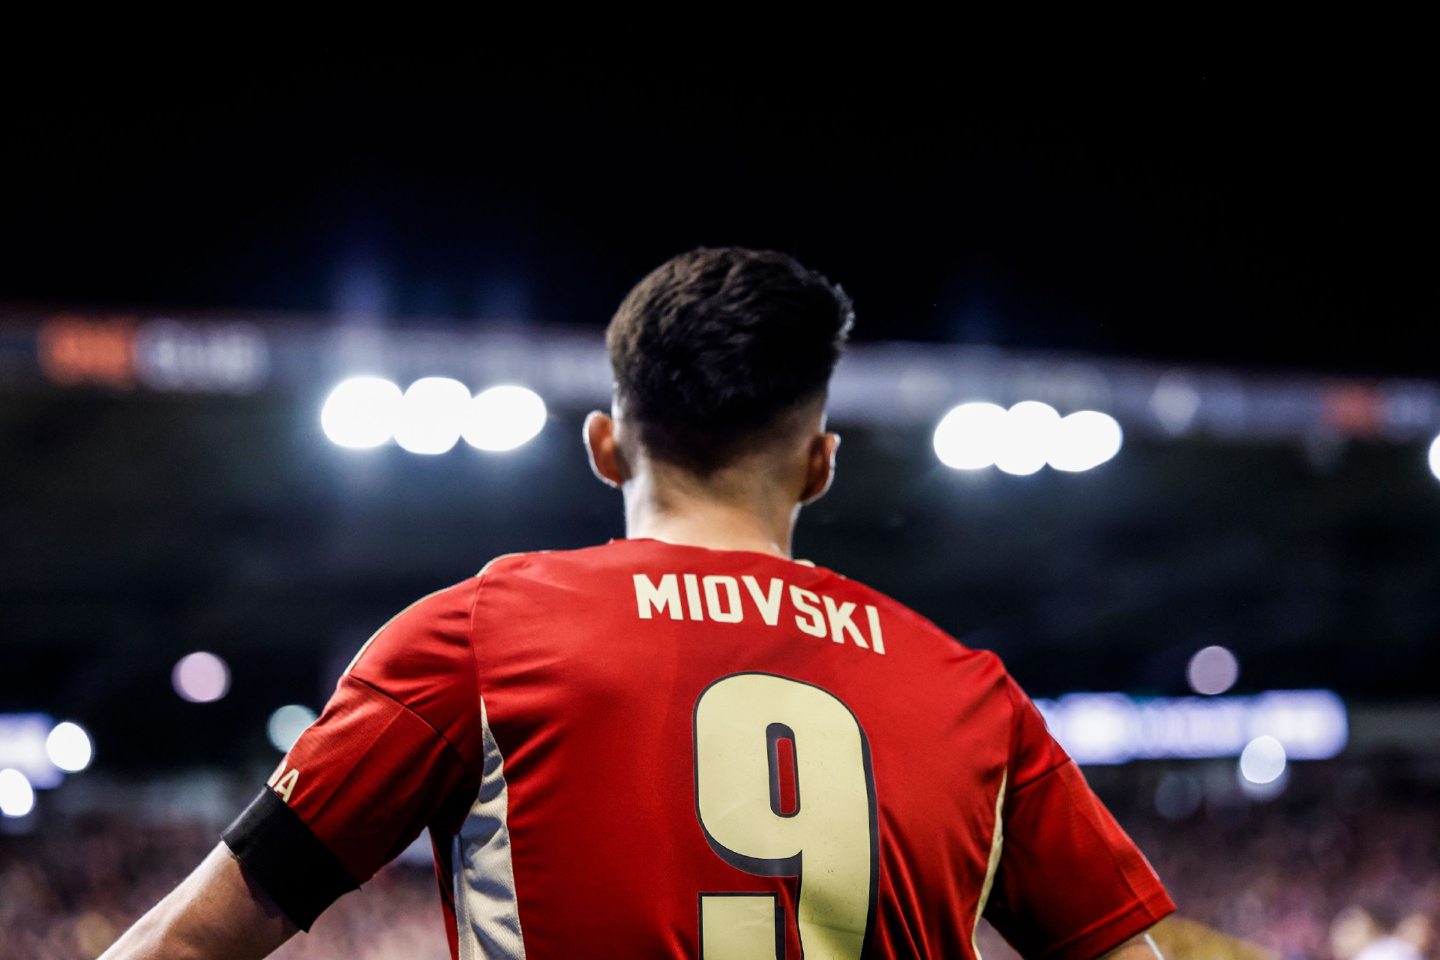 Aberdeen striker Bojan Miovski's back with a clear shot of the back of his shirt